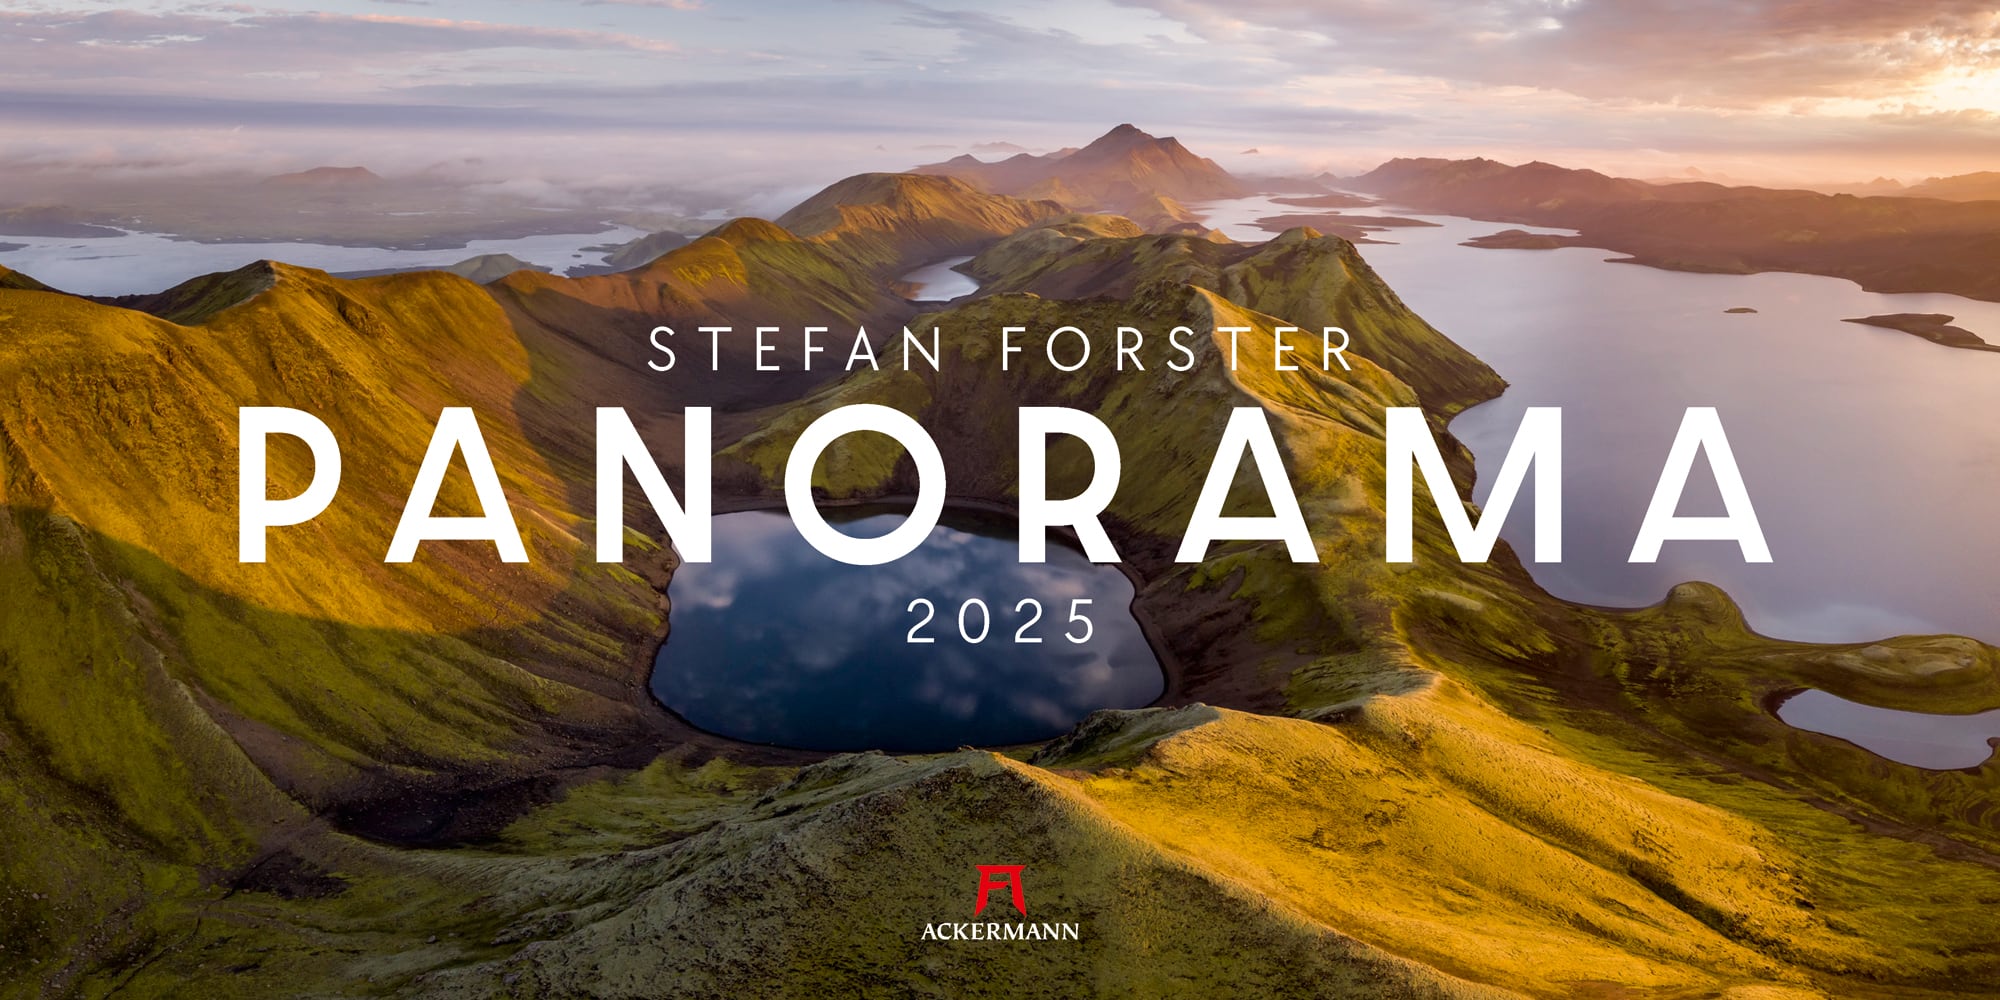 Ackermann Calendar Panoramic Views - Stefan Forster 2025 - Cover Page